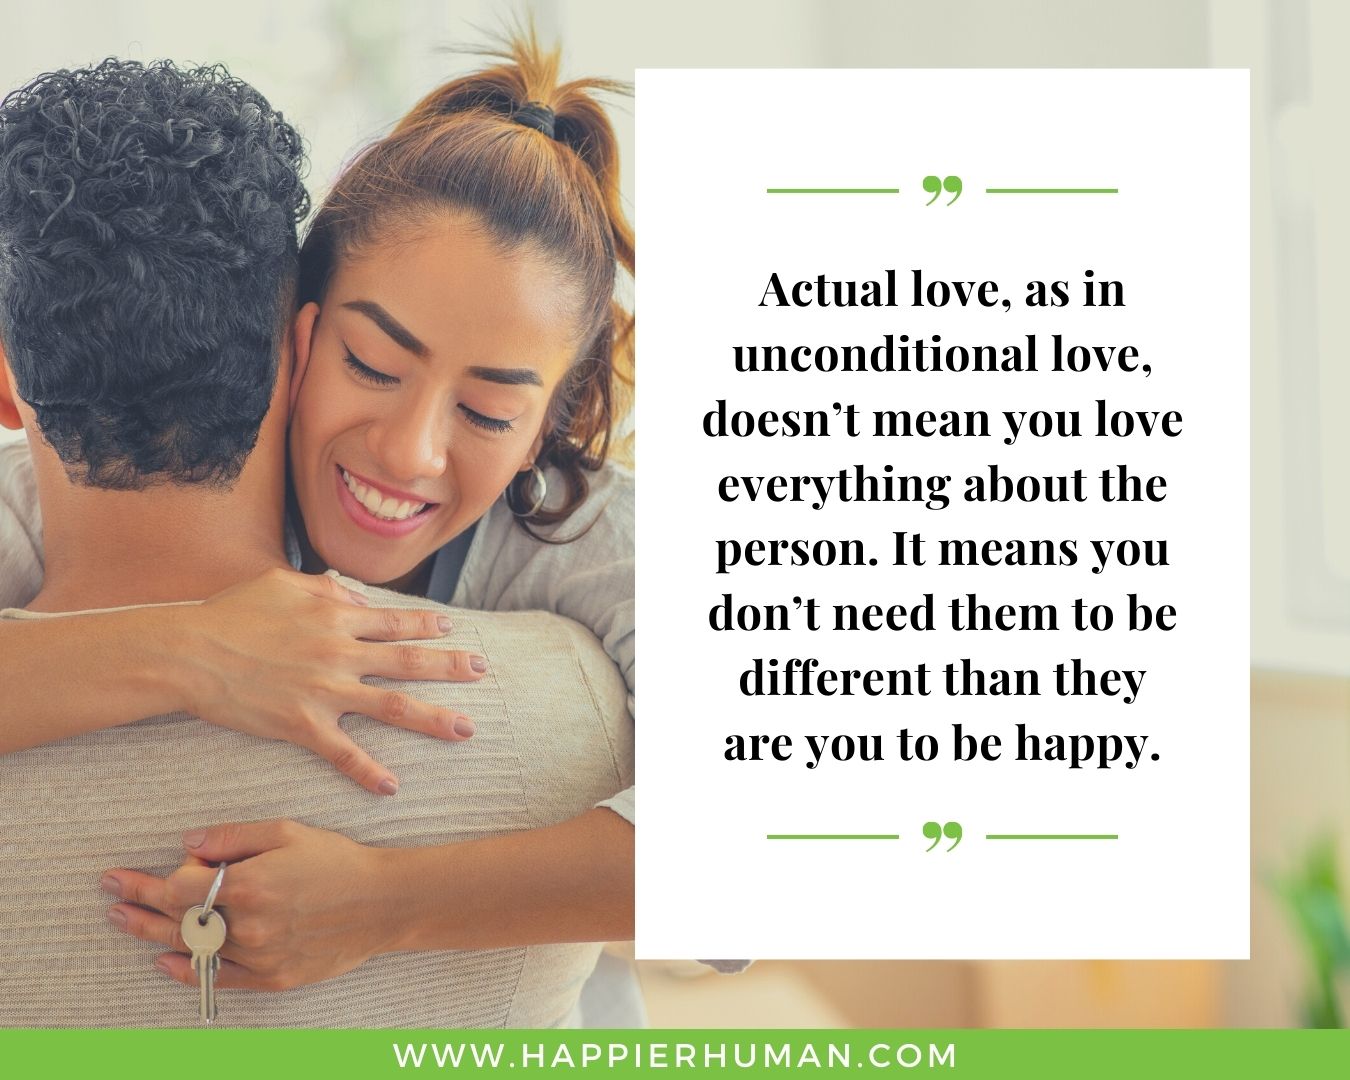 Quotes of Love and Happiness for Her  - “Actual love, as in unconditional love, doesn’t mean you love everything about the person. It means you don’t need them to be different than they are you to be happy.”